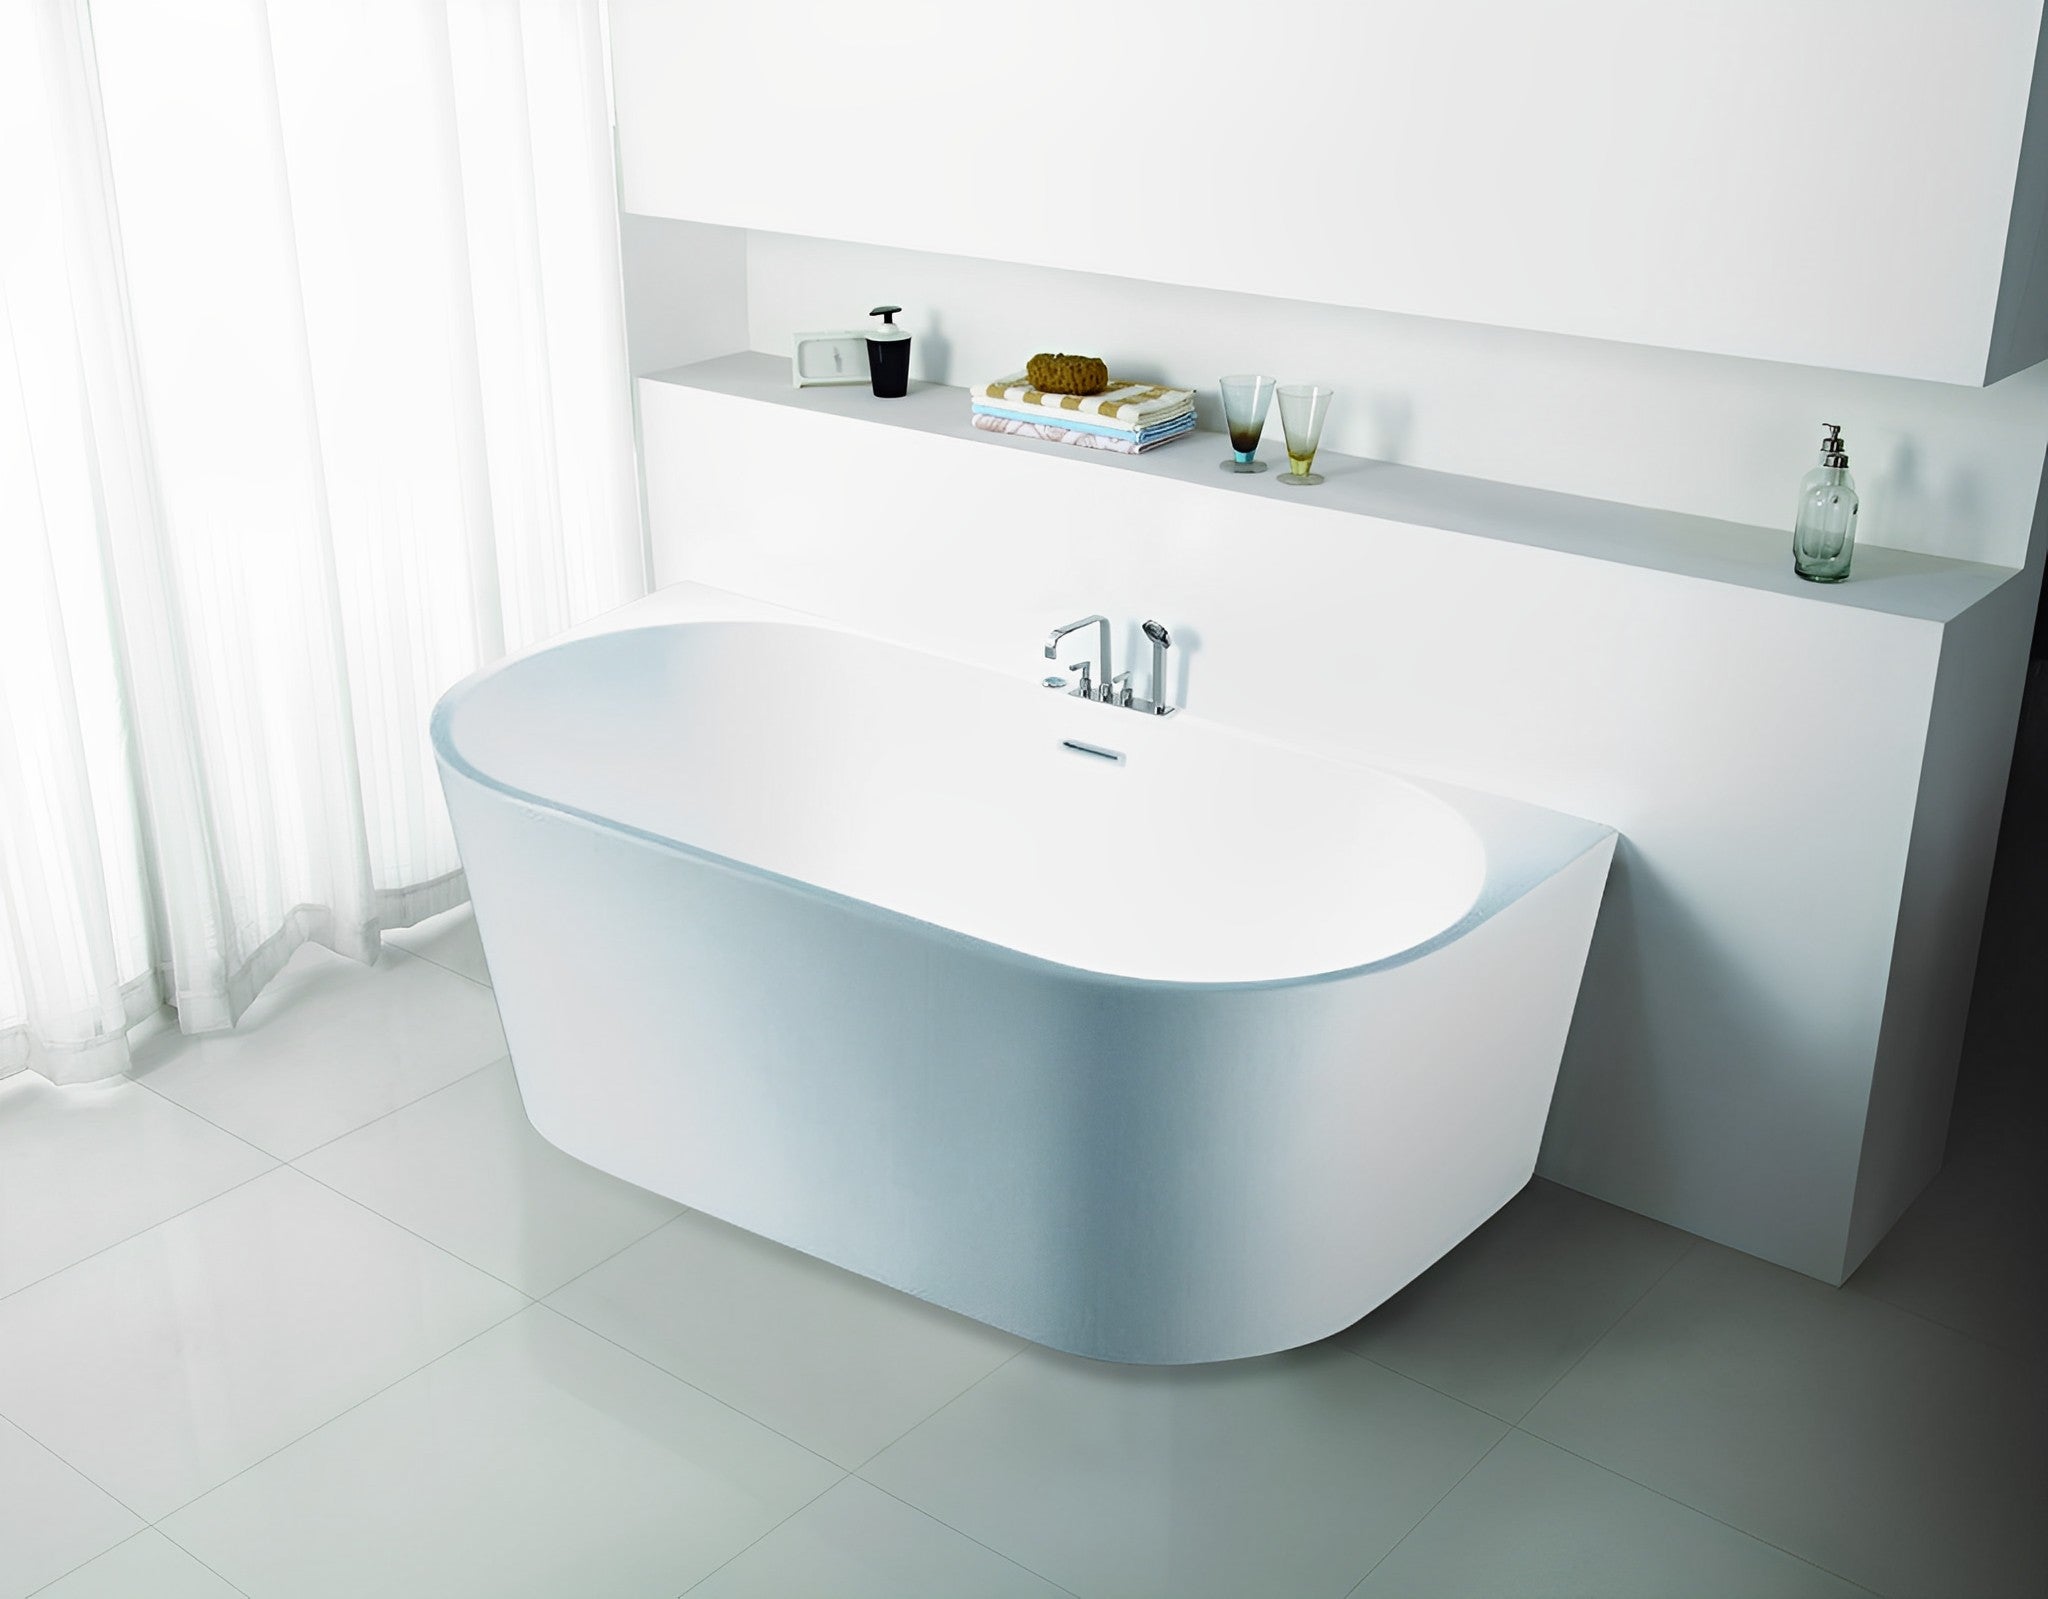 POSEIDON ELIVIA BACK TO WALL BATHTUB GLOSS WHITE (AVAILABLE IN 1490MM AND 1690MM)